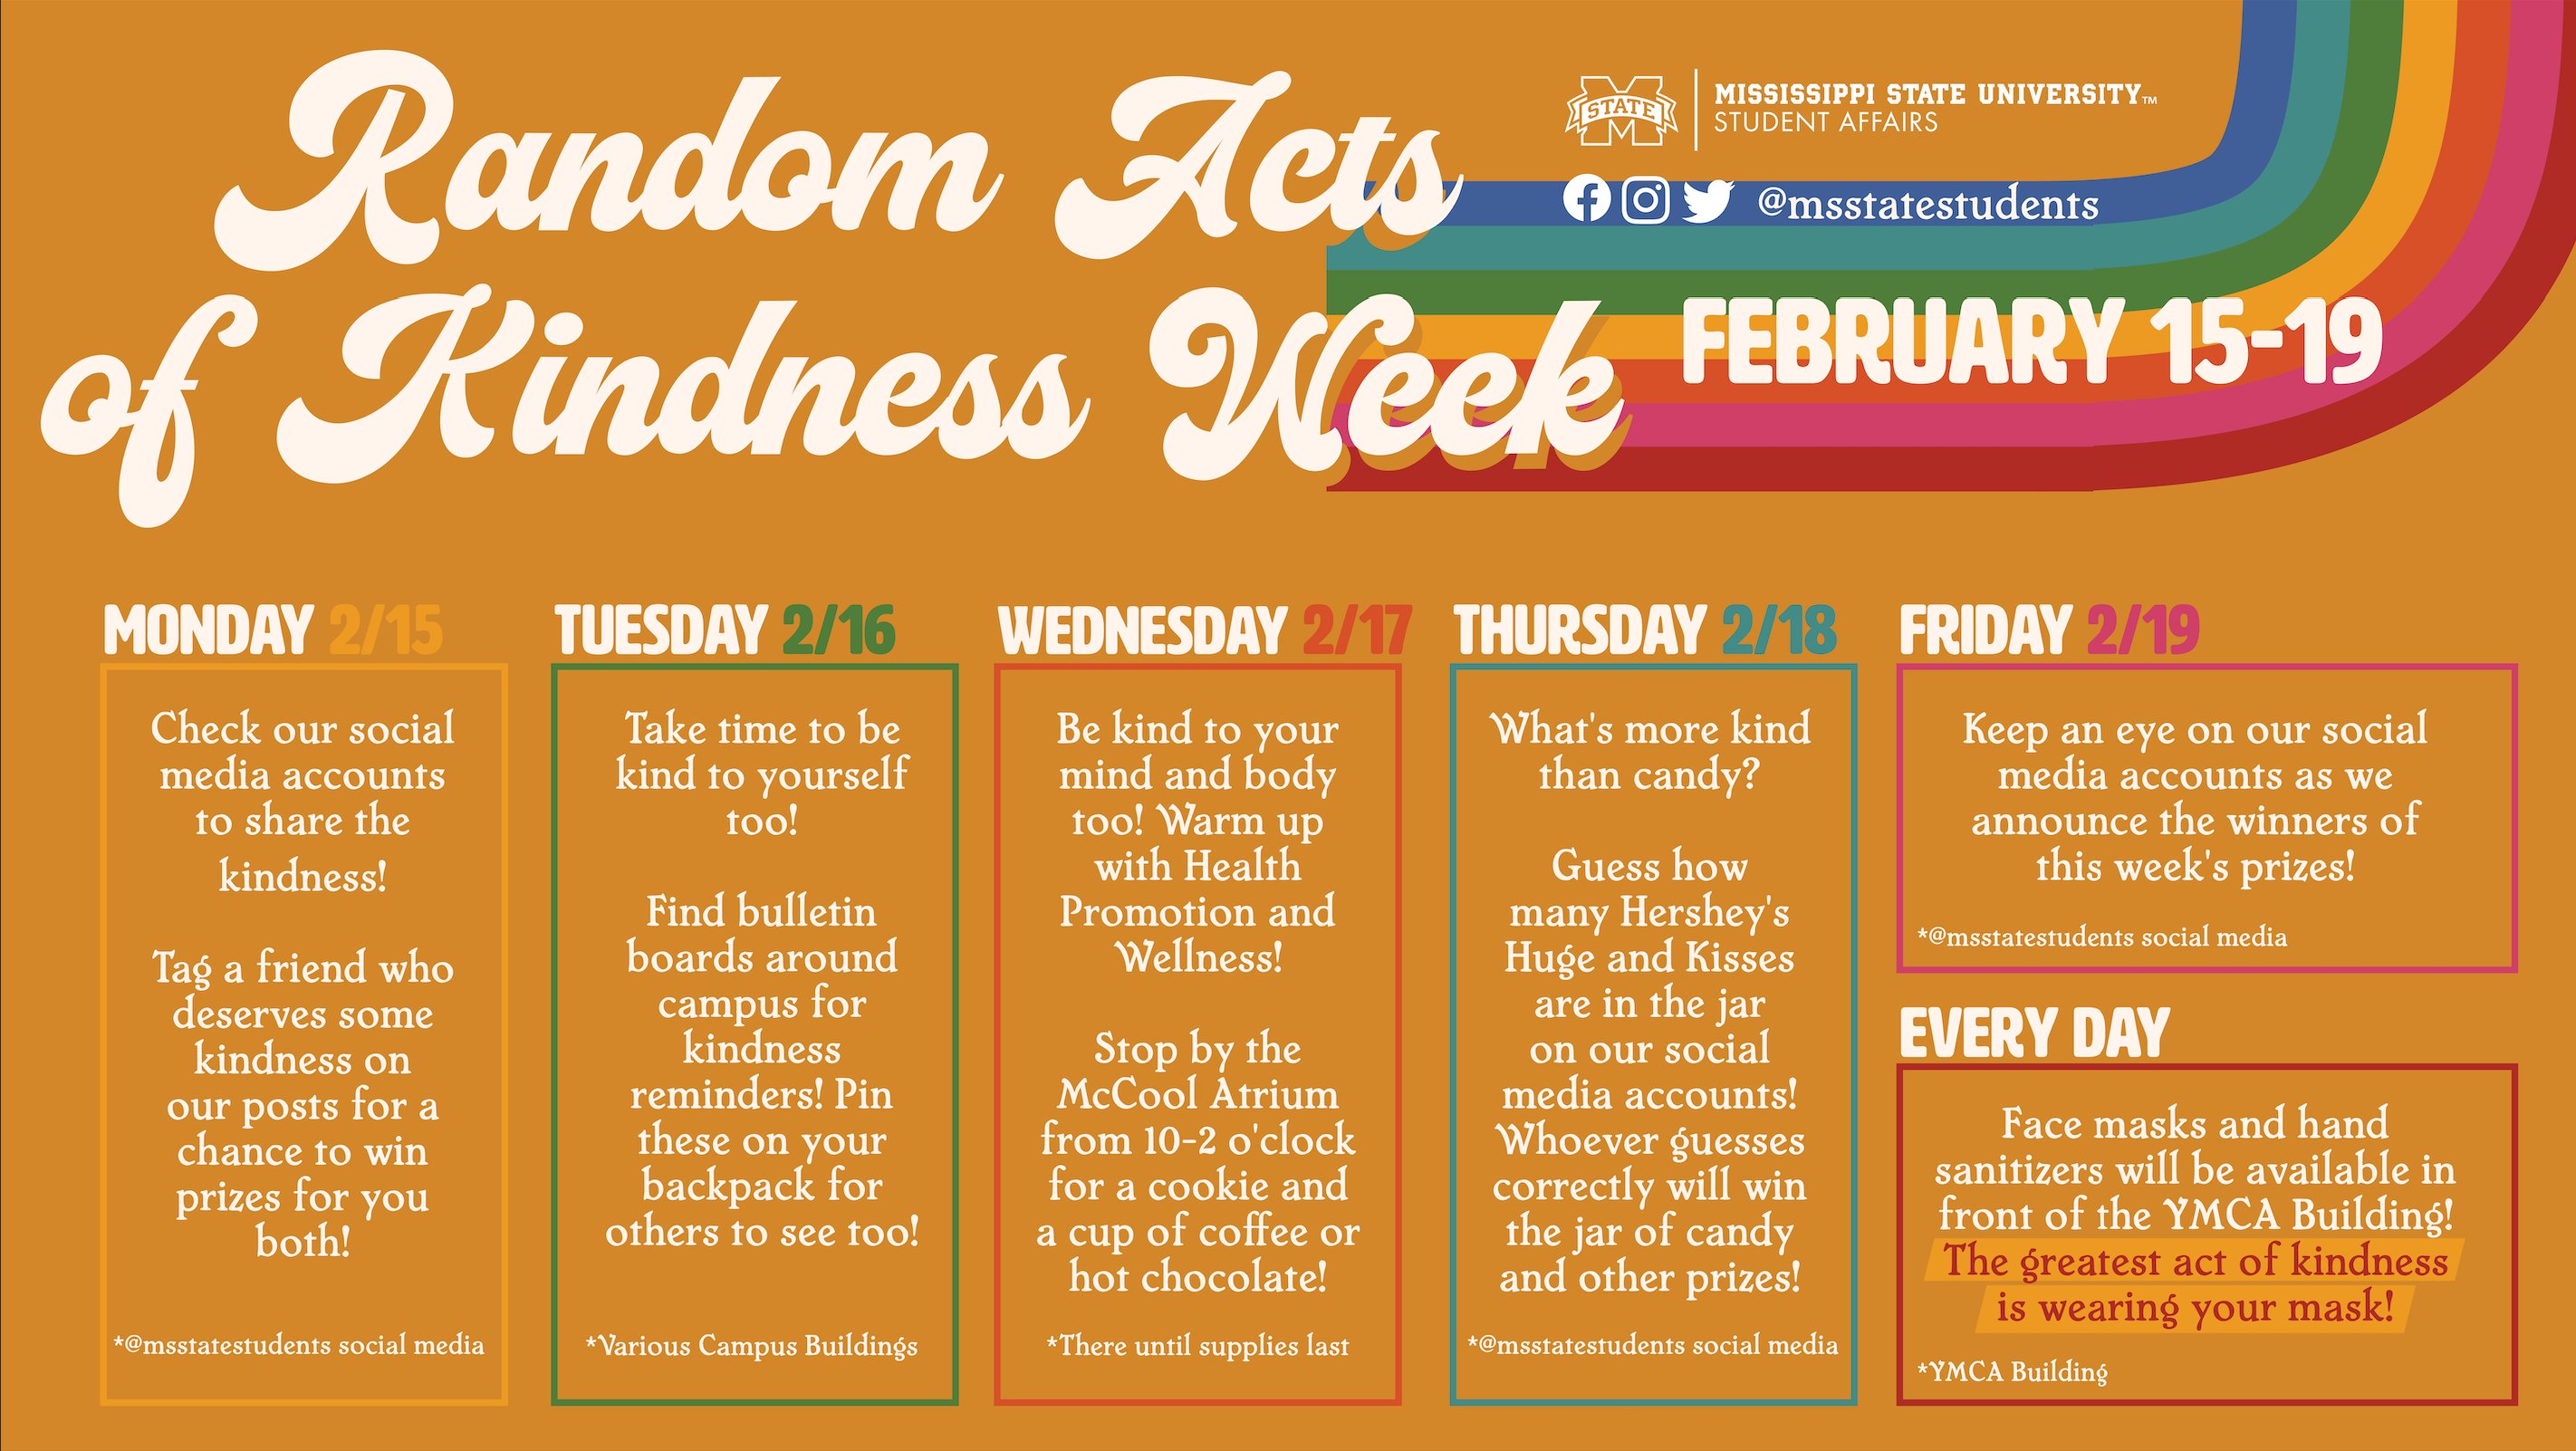 Random acts of kindness day on nude photos